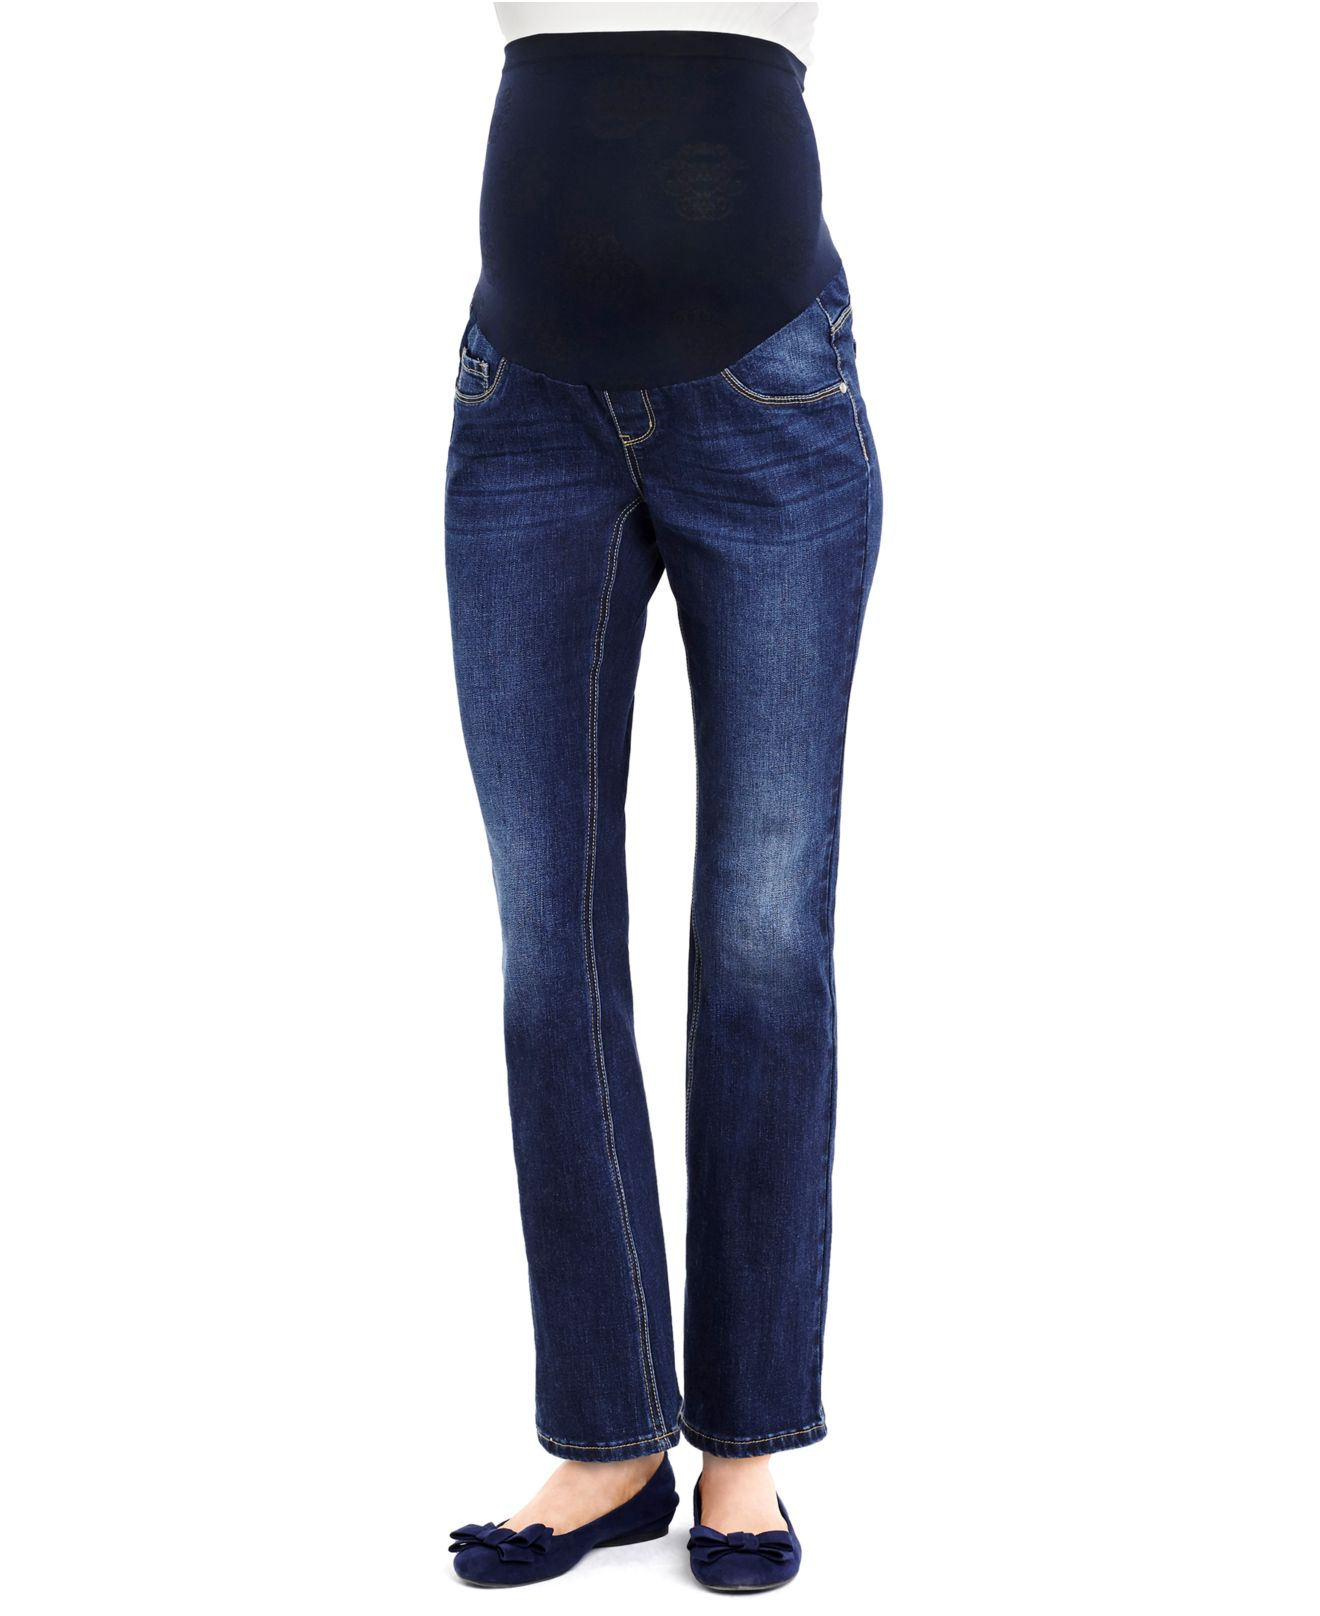 Lyst - Jessica Simpson Maternity Slim Bootcut Jeans in Blue